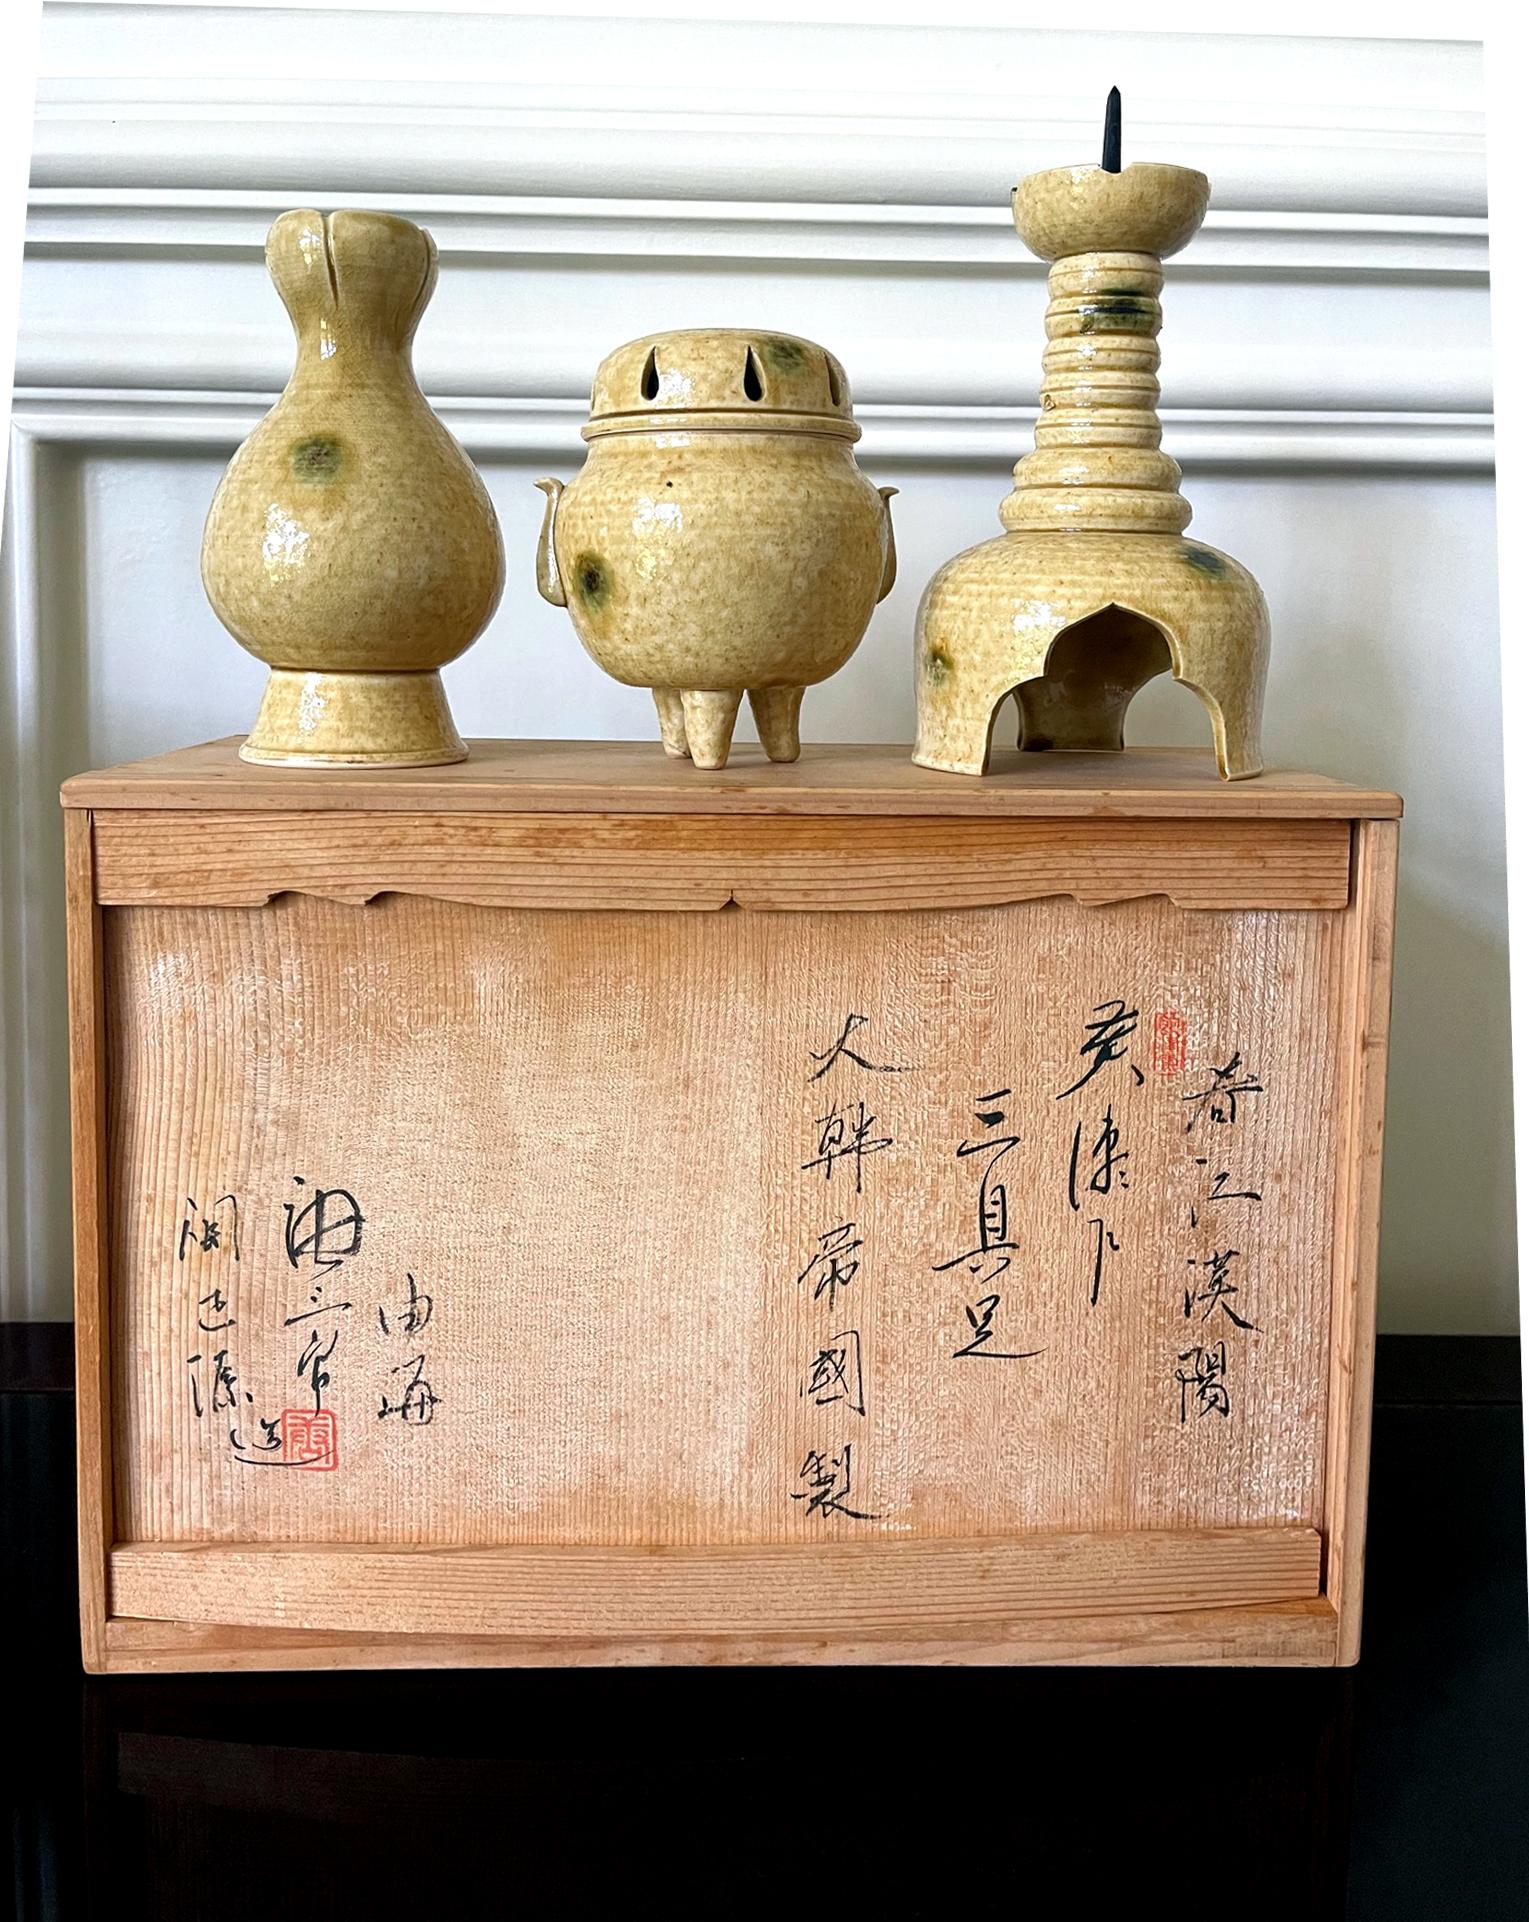 A set of three ki-seto (yellow-seto) ceramic altar pieces made in the period of Korean Empire (1897-1910), a short independent period after Joseon dynasty before the invasion and occupation by Japan. The set consists of a candle holder with a metal